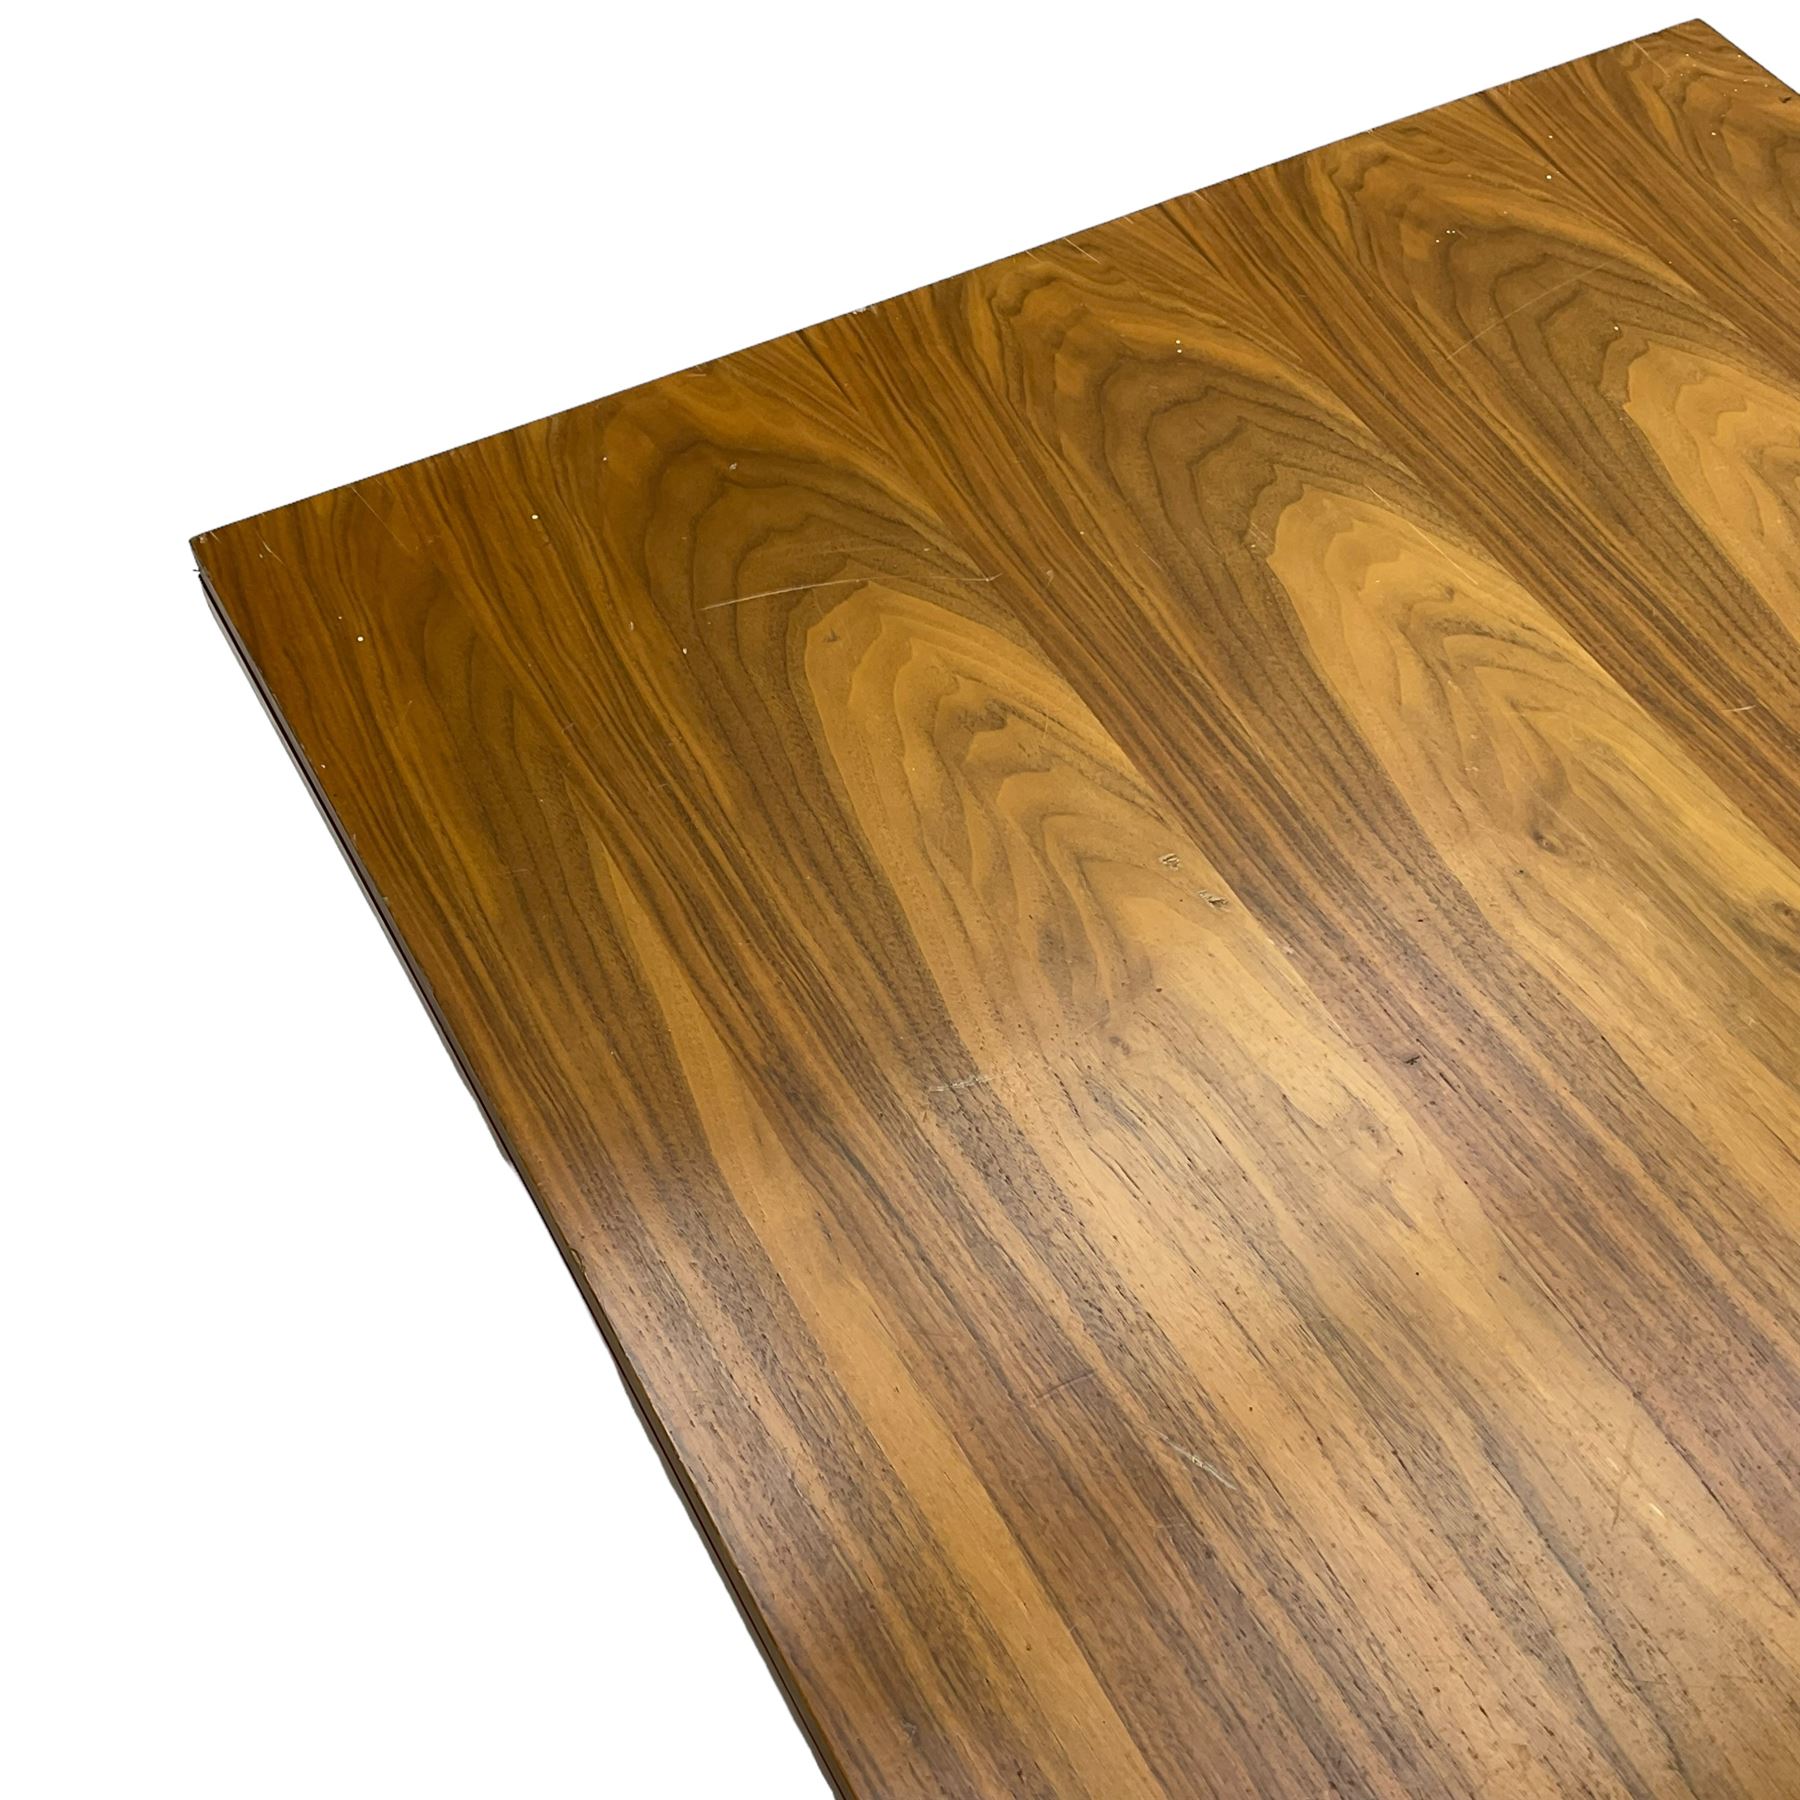 Contemporary walnut metamorphic coffee or dining table - Image 2 of 7